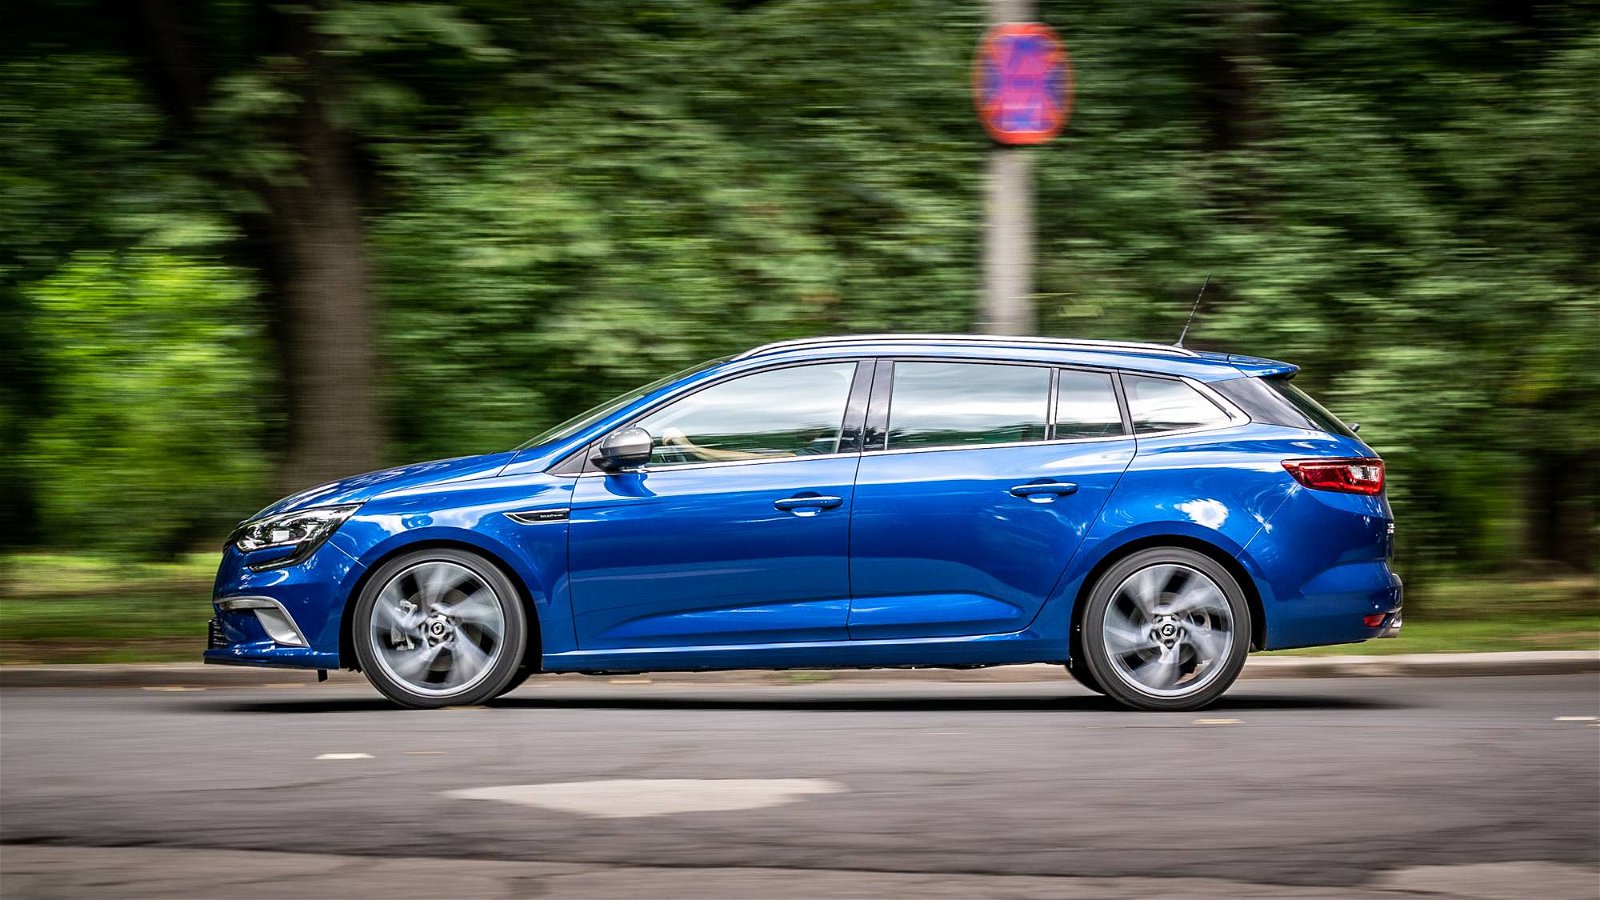 staking schrijven Verenigen 2018 Renault Megane Estate GT review: the people's quickish wagon |  DriveMag Cars